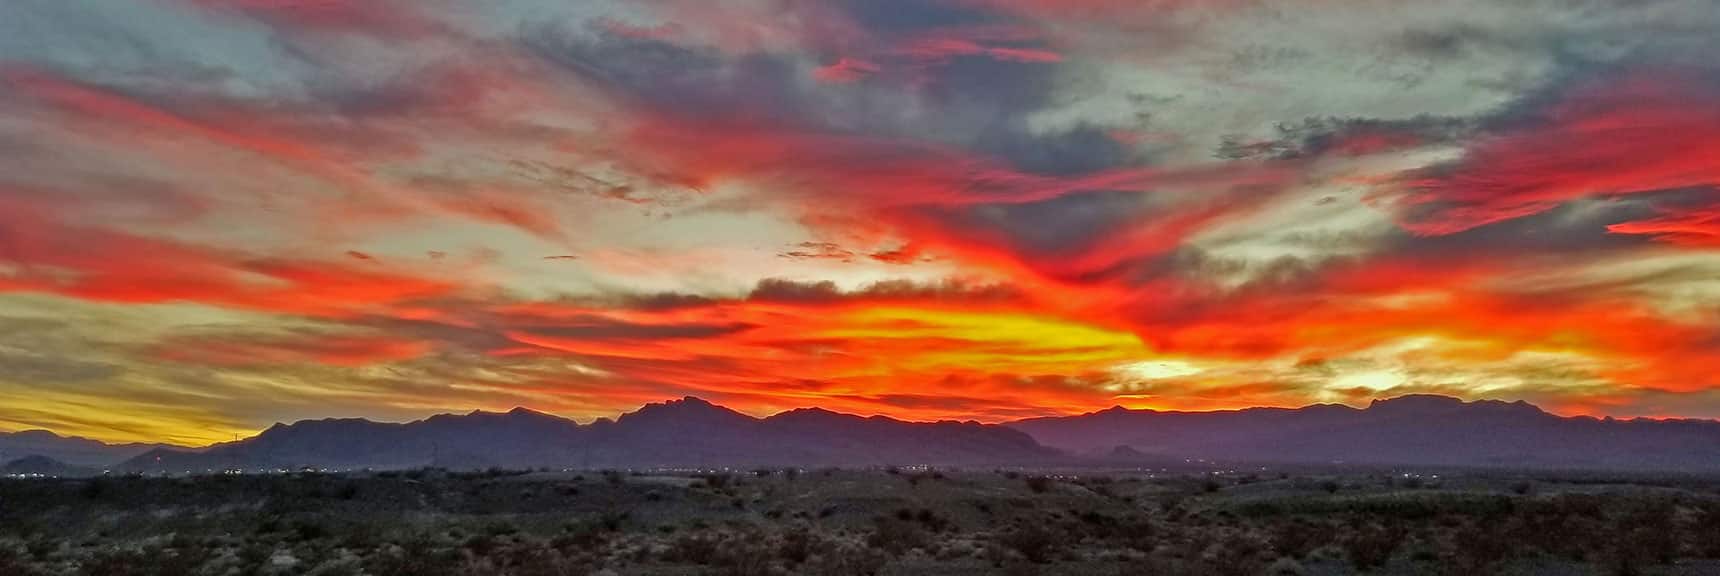 Sunset Over the La Madre Mountains and Mt. Charleston Wilderness. | Gass Peak Grand Crossing | Desert National Wildlife Refuge to Centennial Hills Las Vegas via Gass Peak Summit by Foot